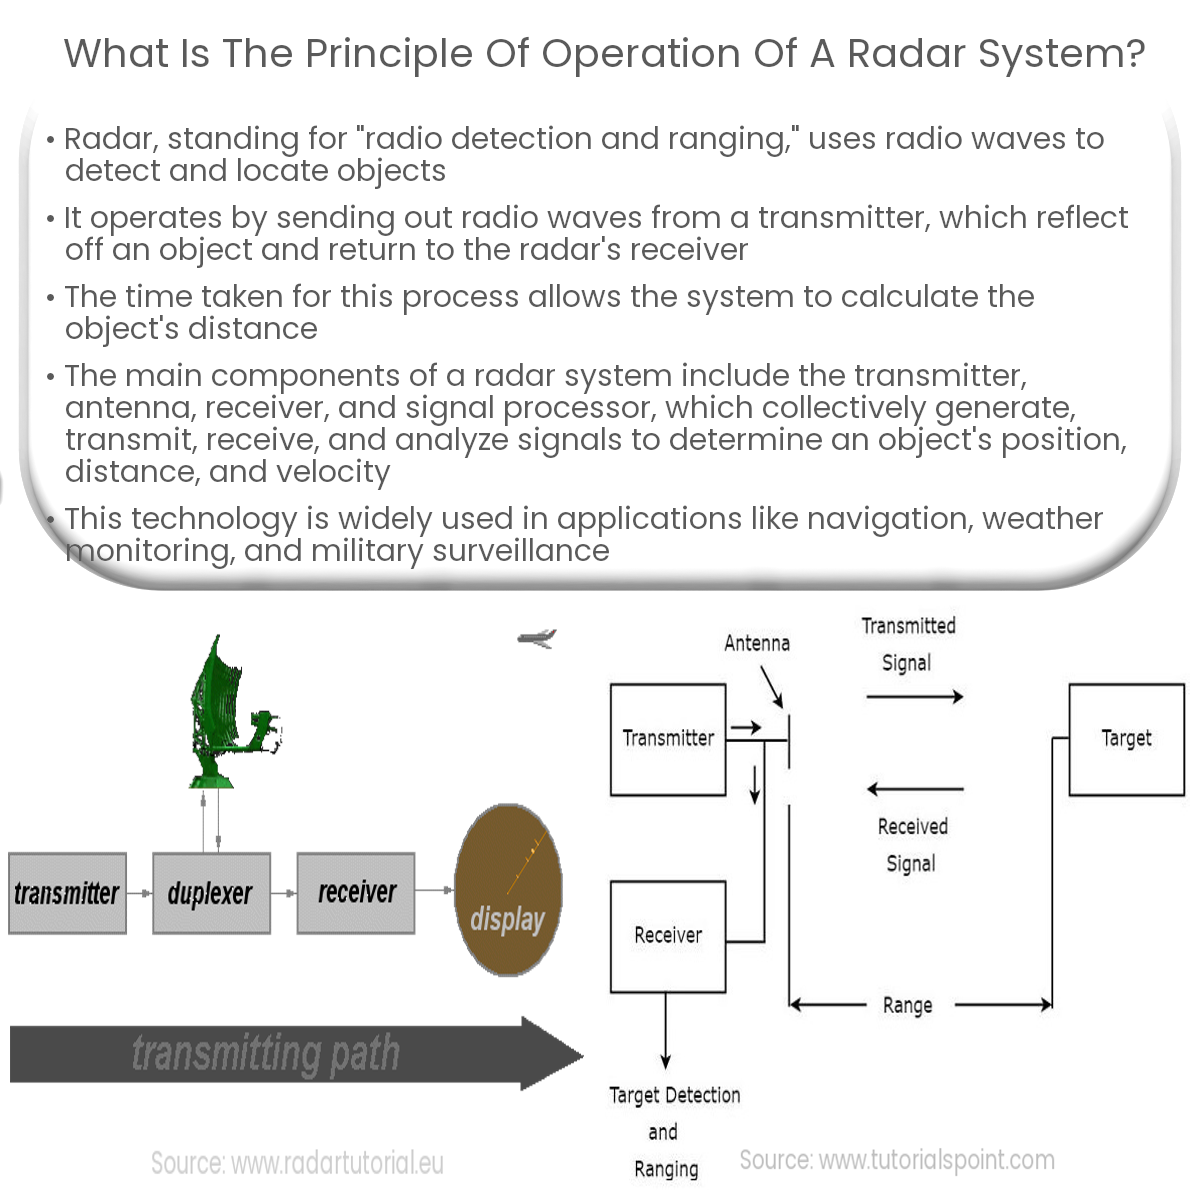 What is the principle of operation of a radar system?